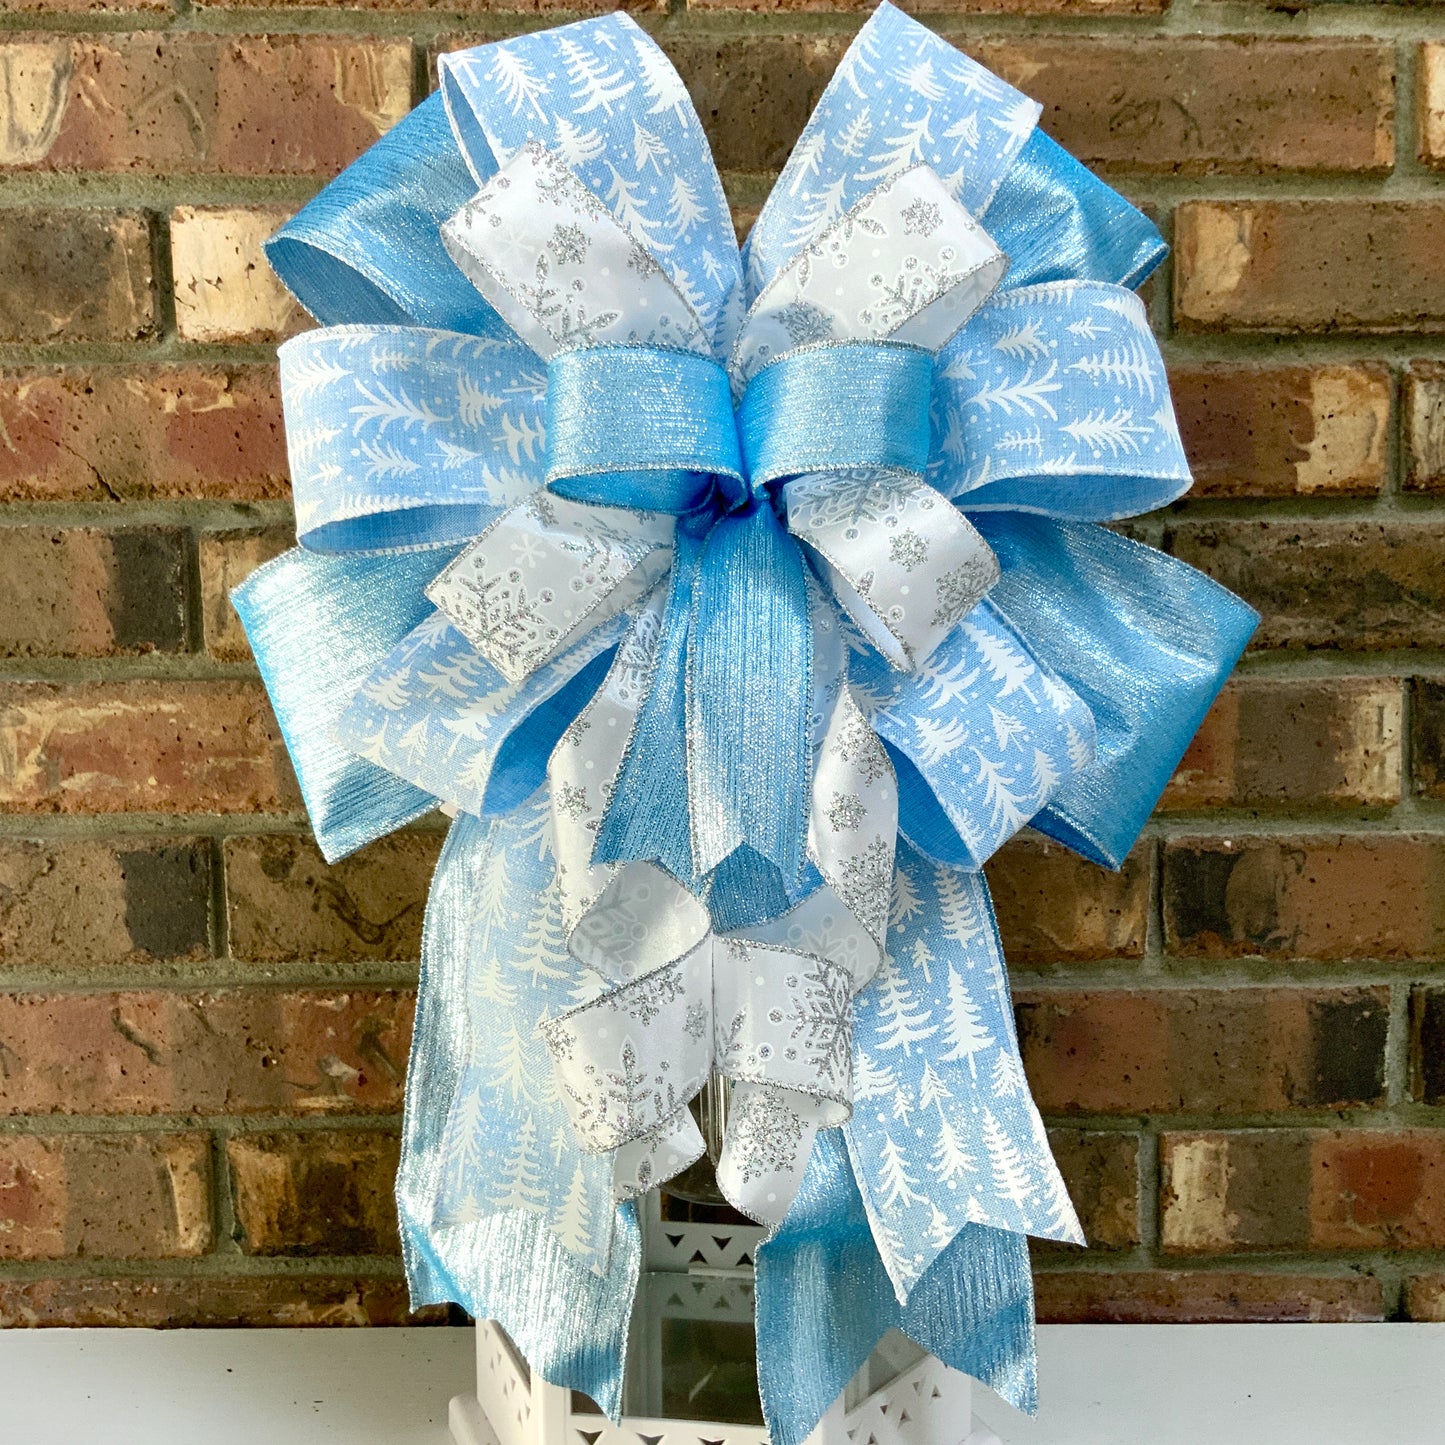 Blue and White Lantern Bow, Blue Winter Christmas Decor, Winter Holiday Bow, Snowflake Bow, Winter Lantern Bow, Winter Mailbox Bow, Winter Not Christmas Decor